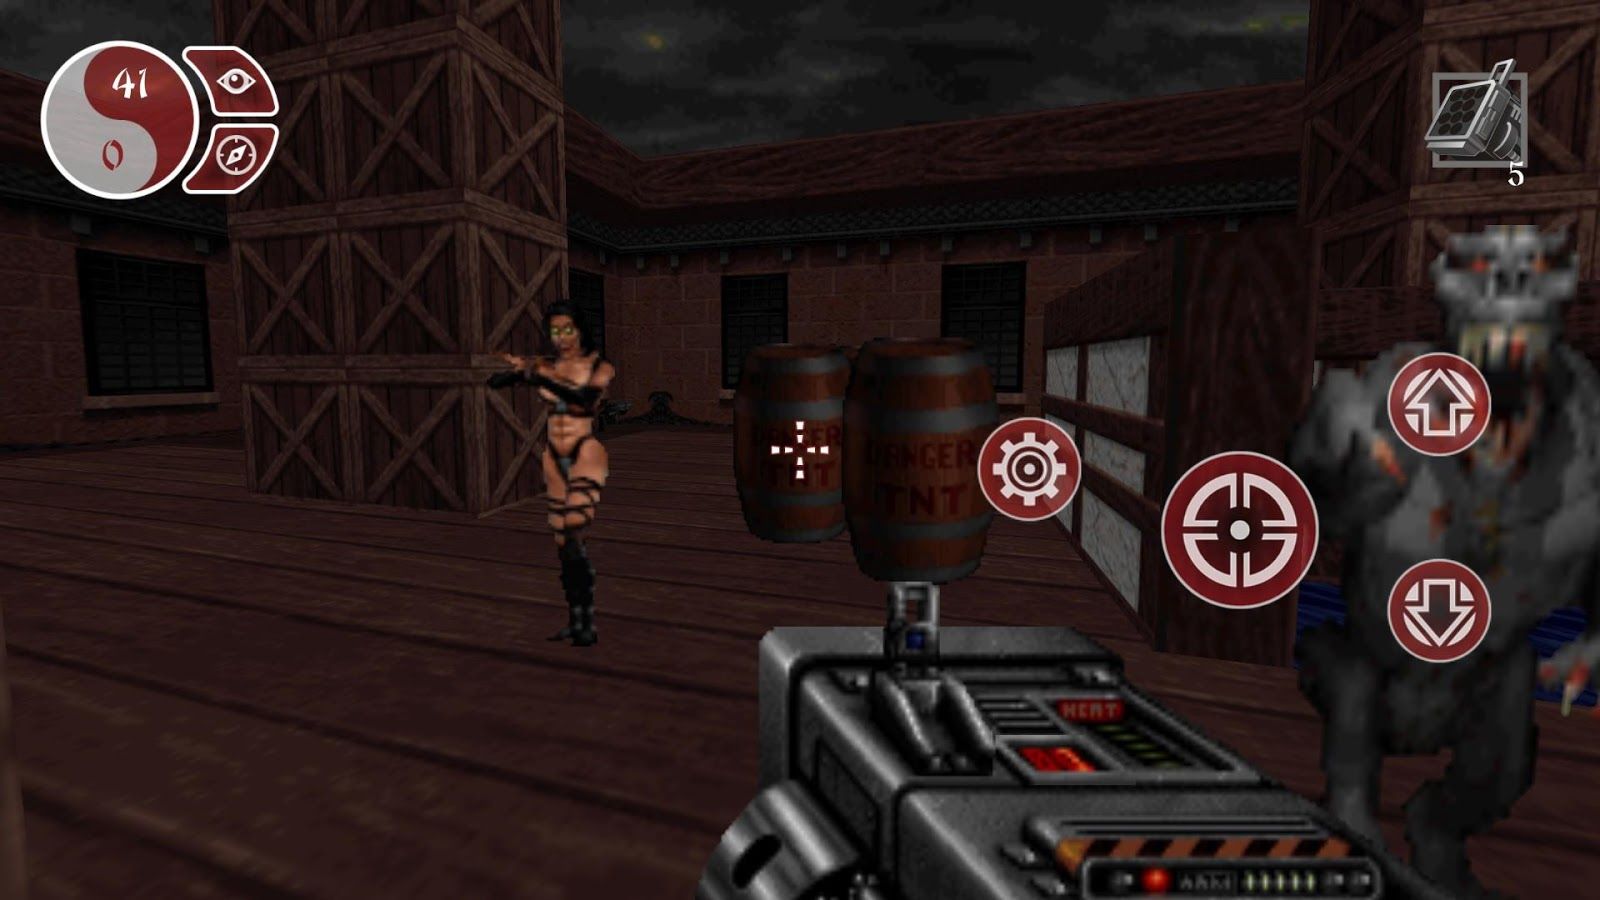 Shadow Warrior finally makes the jump from PC to Android